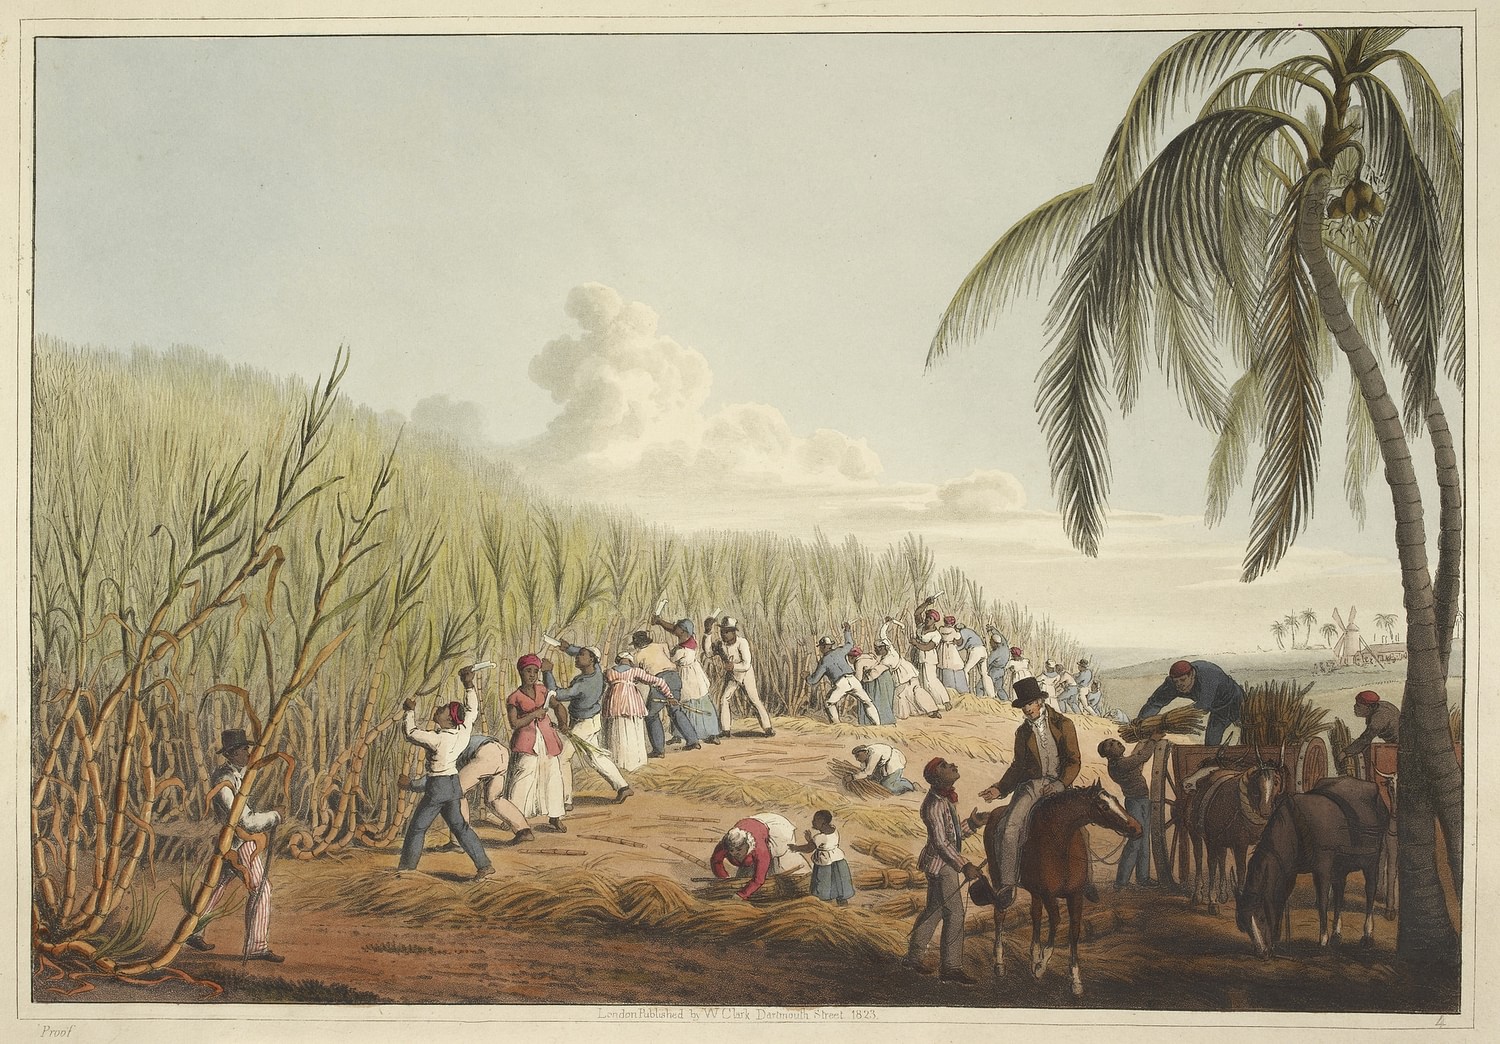 agriculture in colonial times